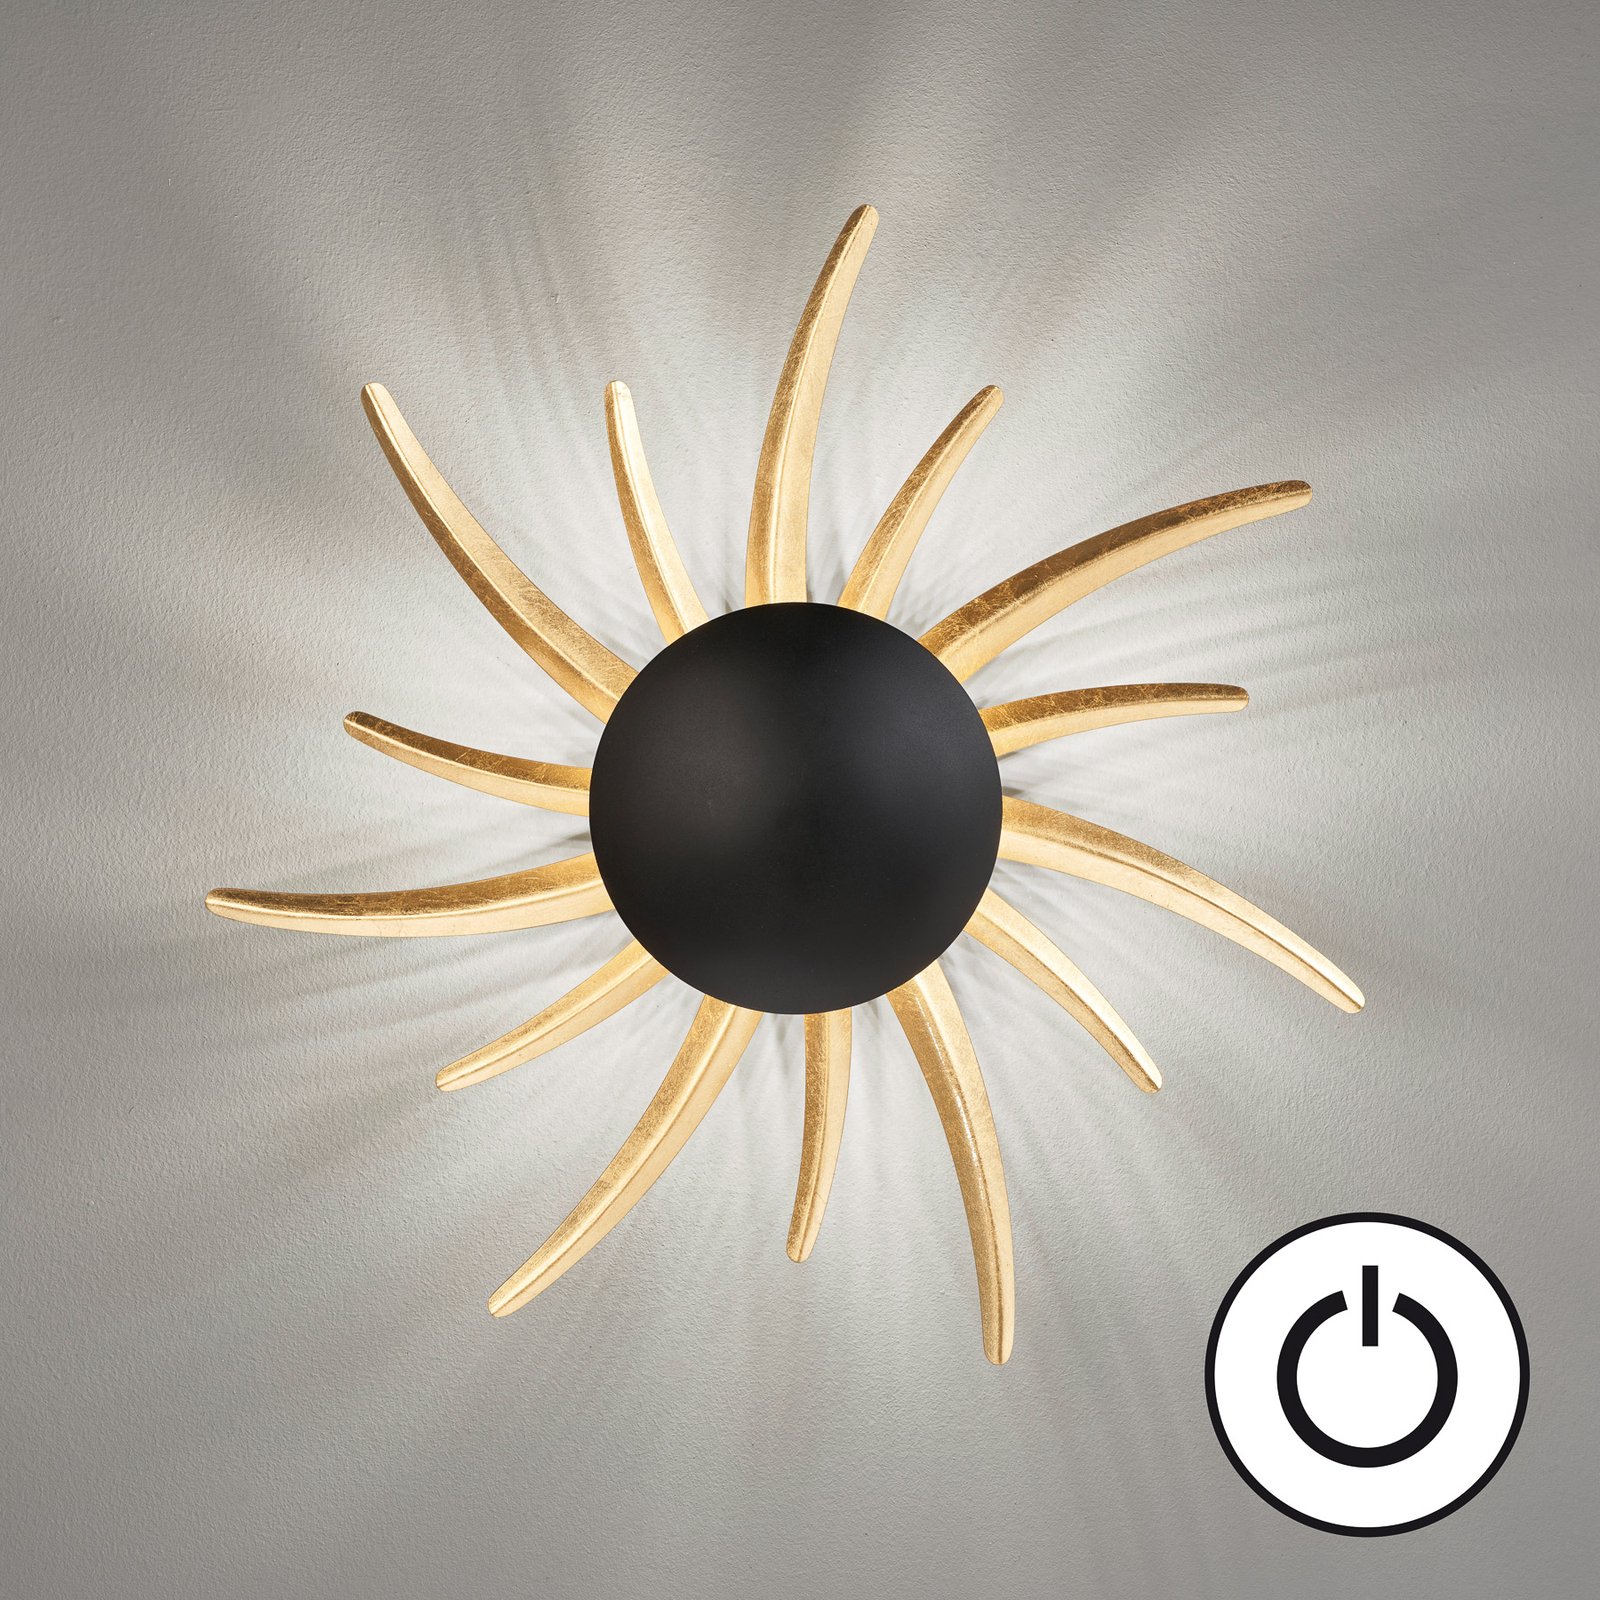 Sol LED wall light, black with golden rays